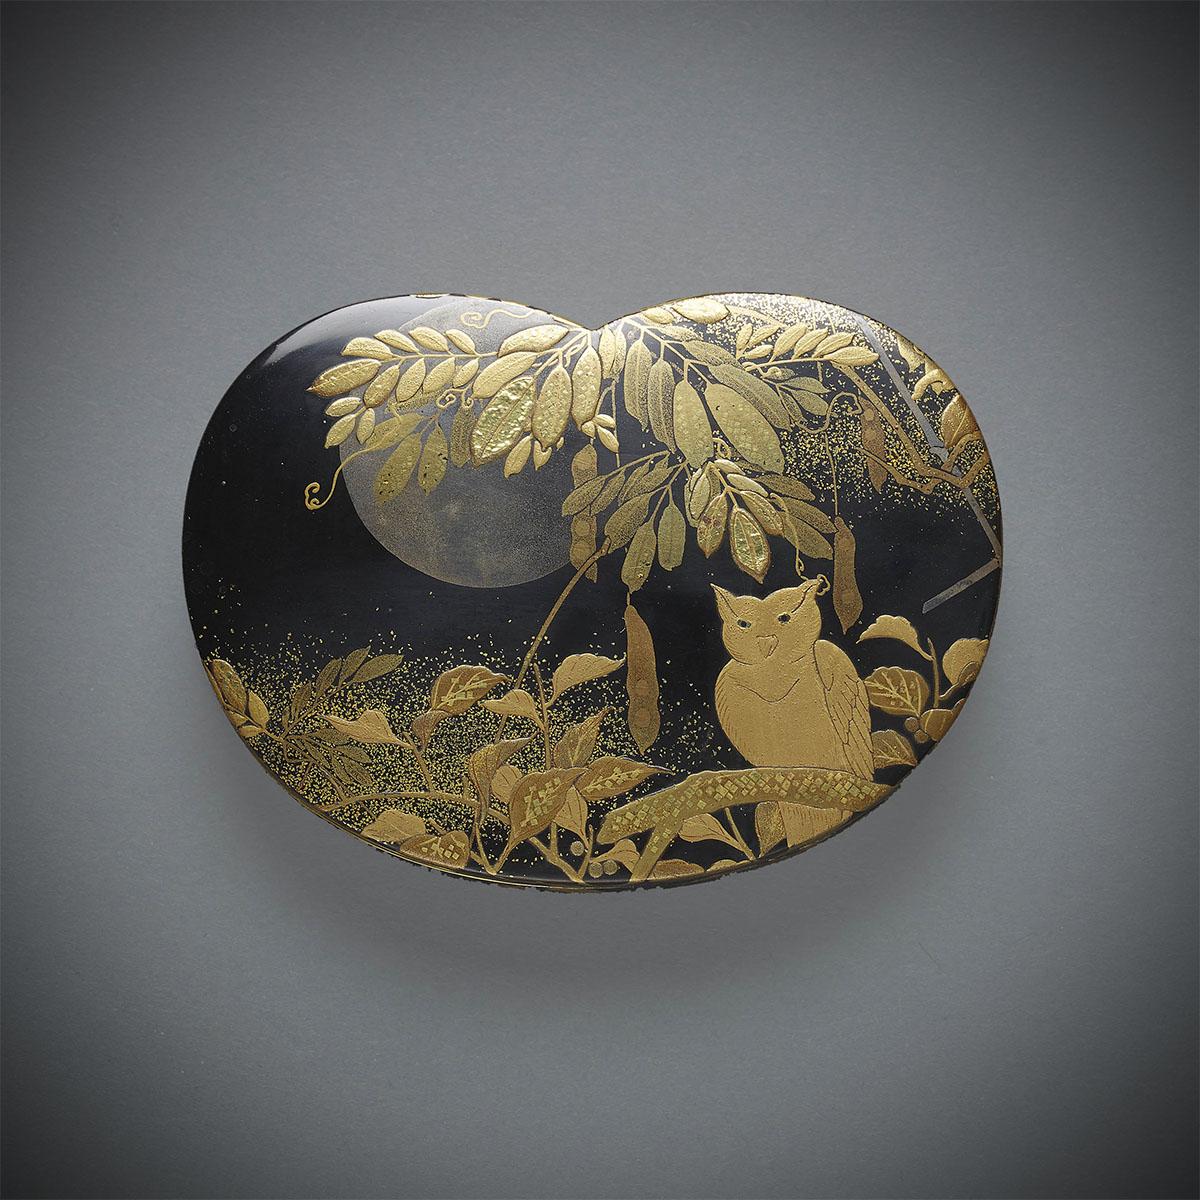 Lacquer Box with Owl